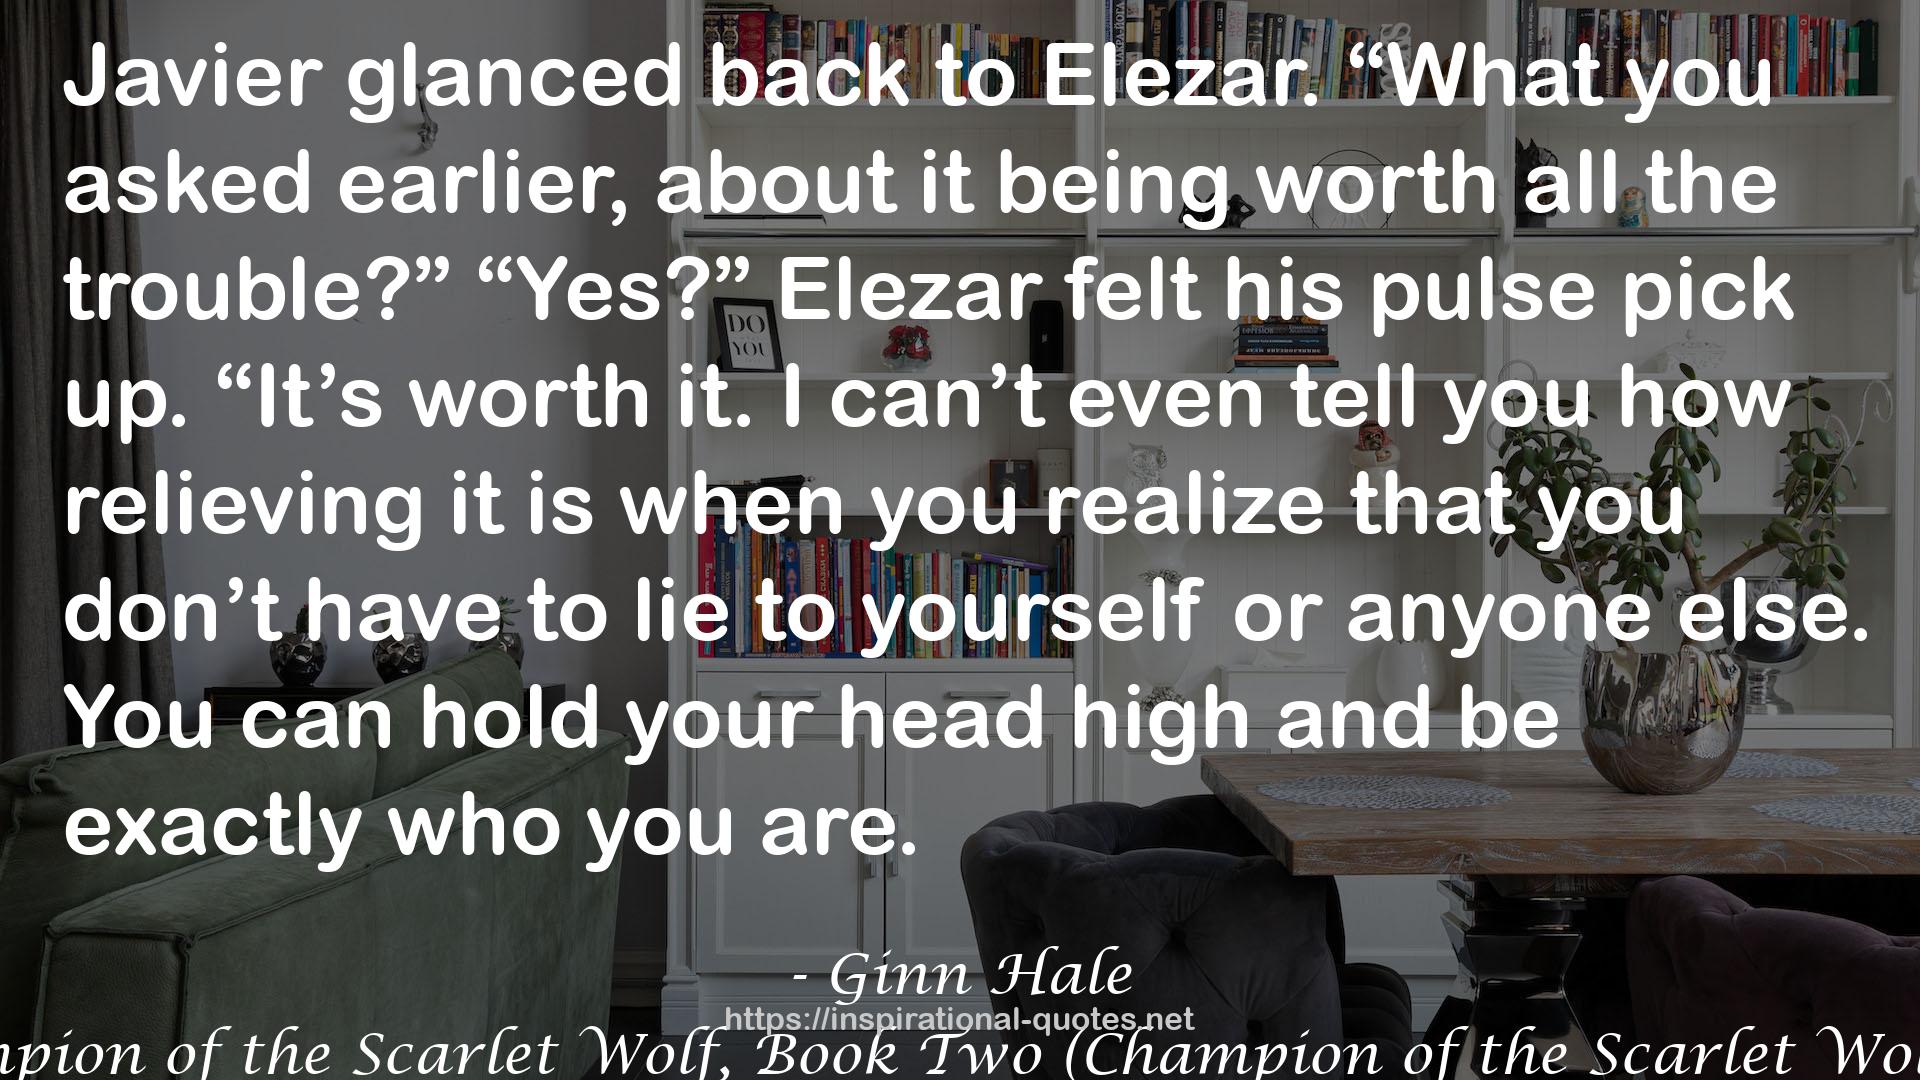 Champion of the Scarlet Wolf, Book Two (Champion of the Scarlet Wolf, #2) QUOTES